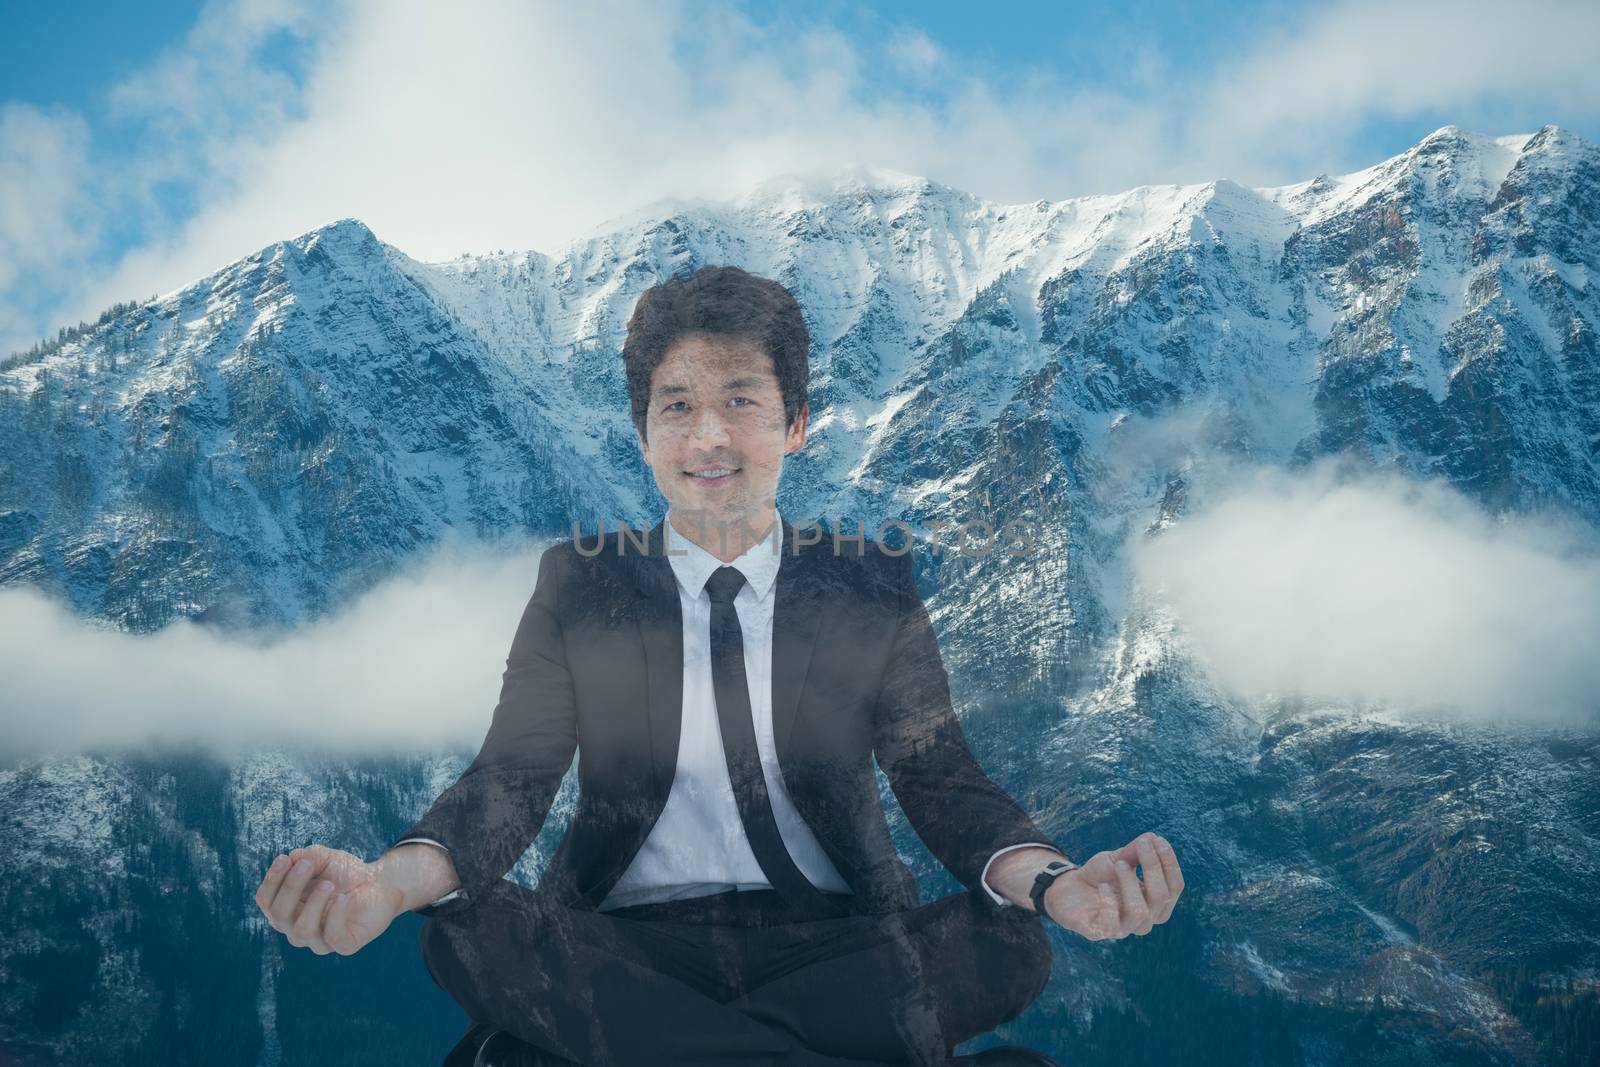 Businessman doing yoga position in front of snow-covered mountains by Wavebreakmedia